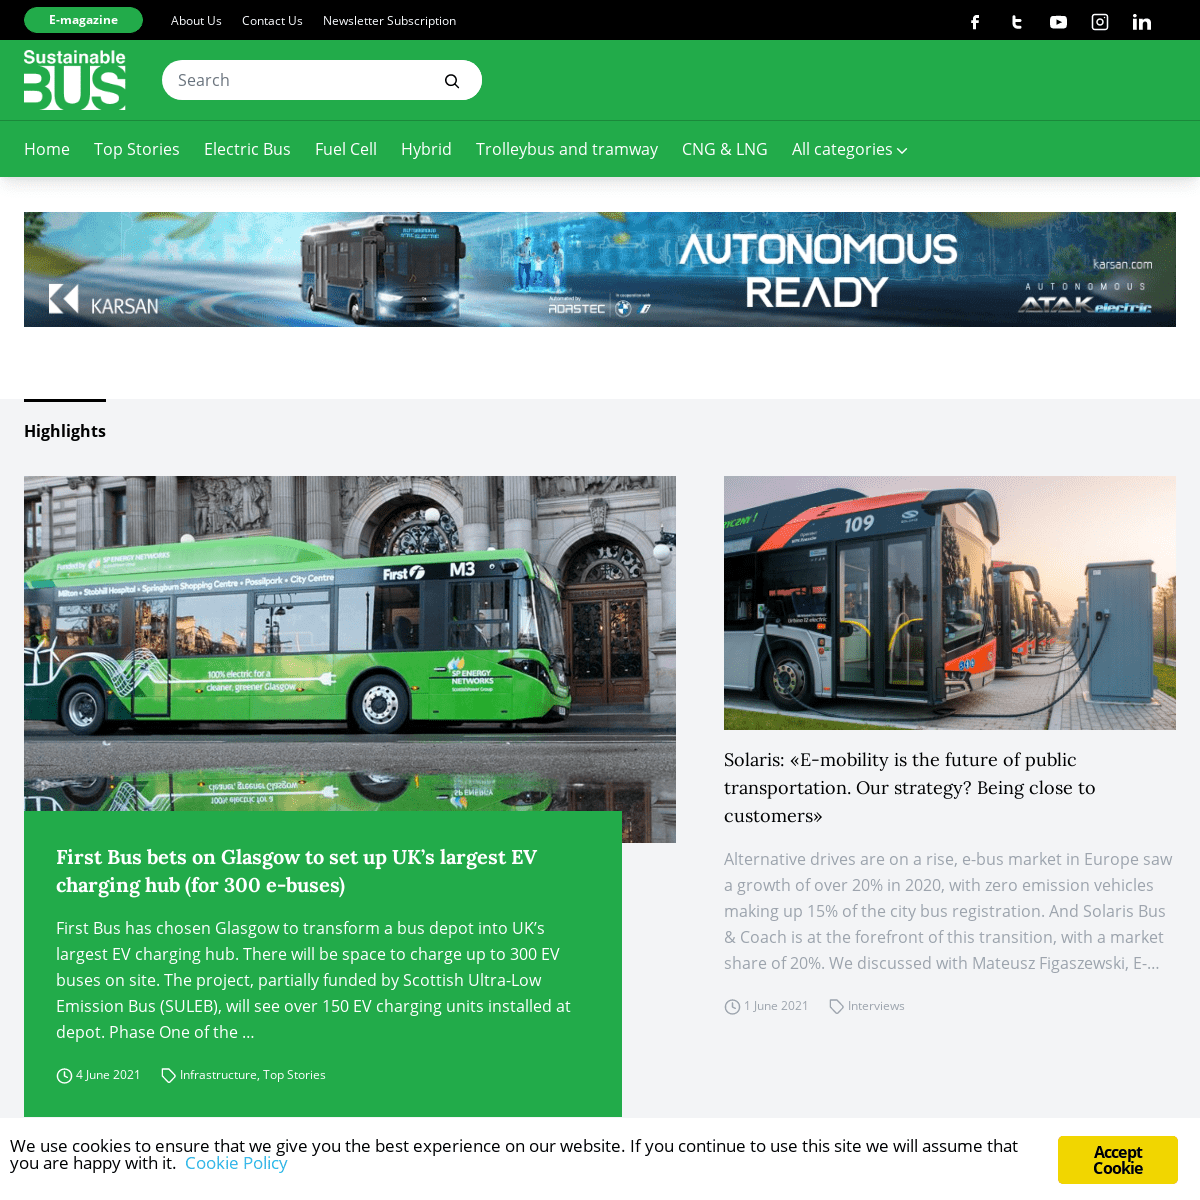 A complete backup of https://sustainable-bus.com